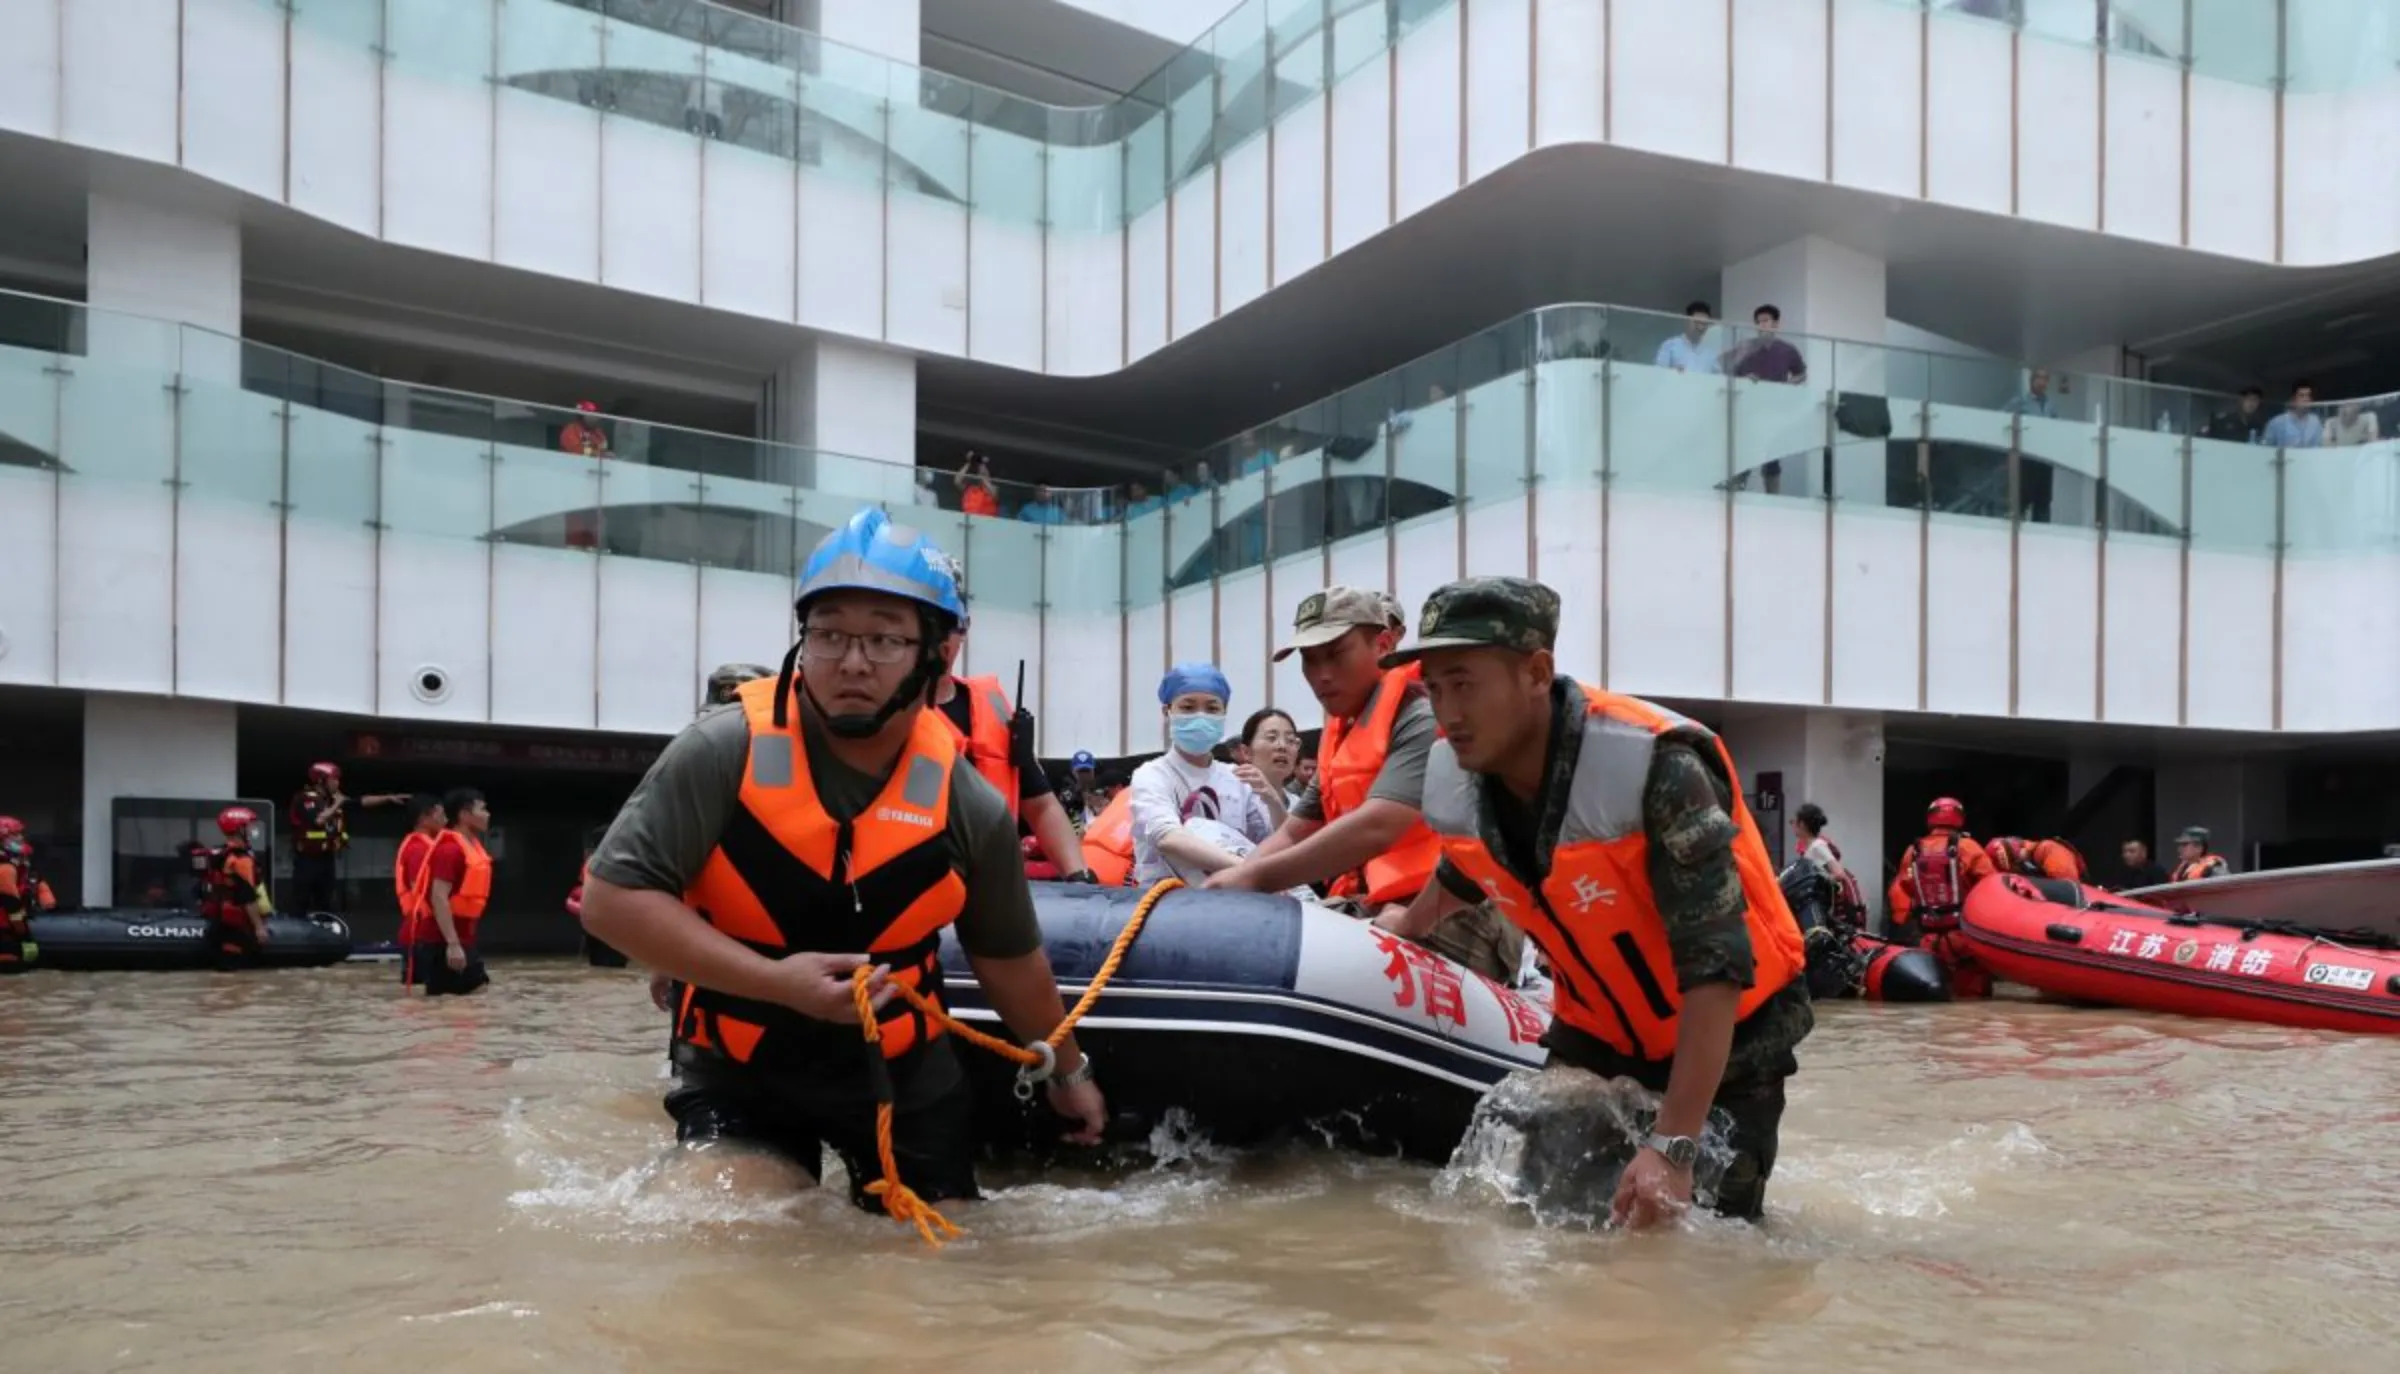 Rescue workers transfer medical workers with a boat at the Fuwai Central China Cardiovascular Hospital which was flooded following heavy rainfalls in Zhengzhou, Henan province, China July 22, 2021. China Daily via REUTERS